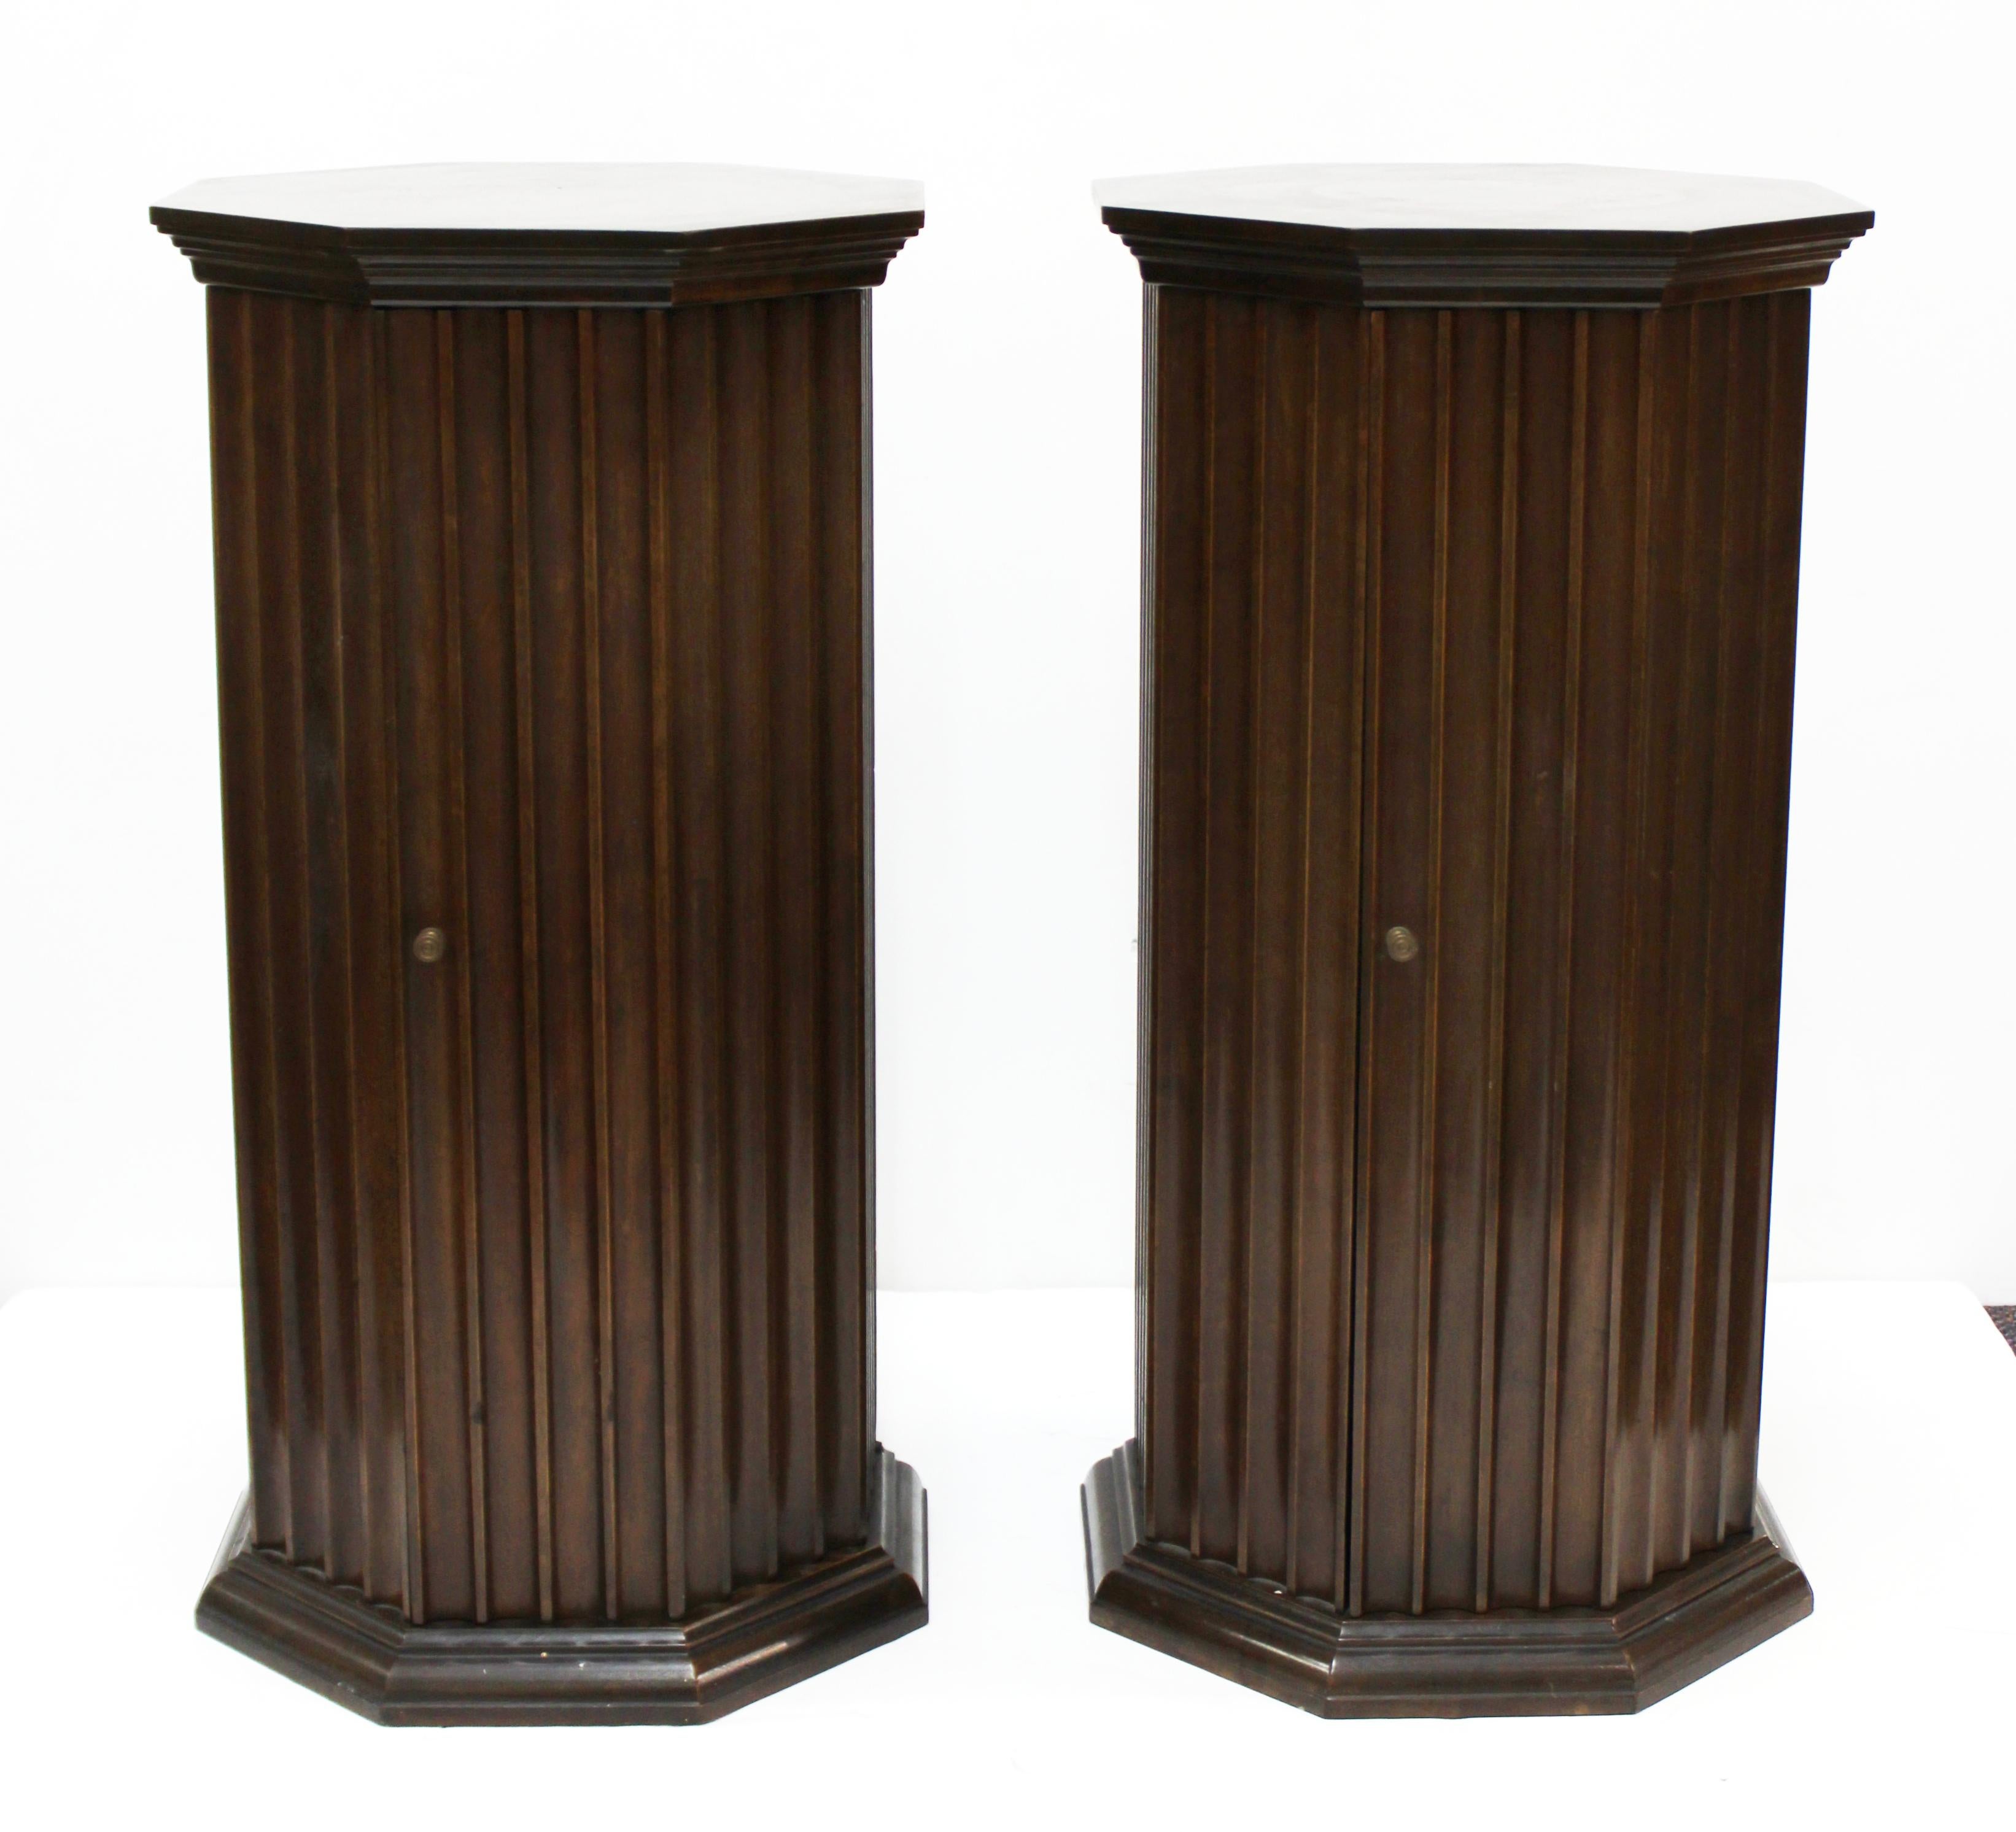 Mid-Century Modern octagonal fluted wood pedestals made from mahogany. Each pedestal has a door and one shelf on the interior. The pair was made in the United States in the 1970s and is in great vintage condition with age-appropriate wear and use.